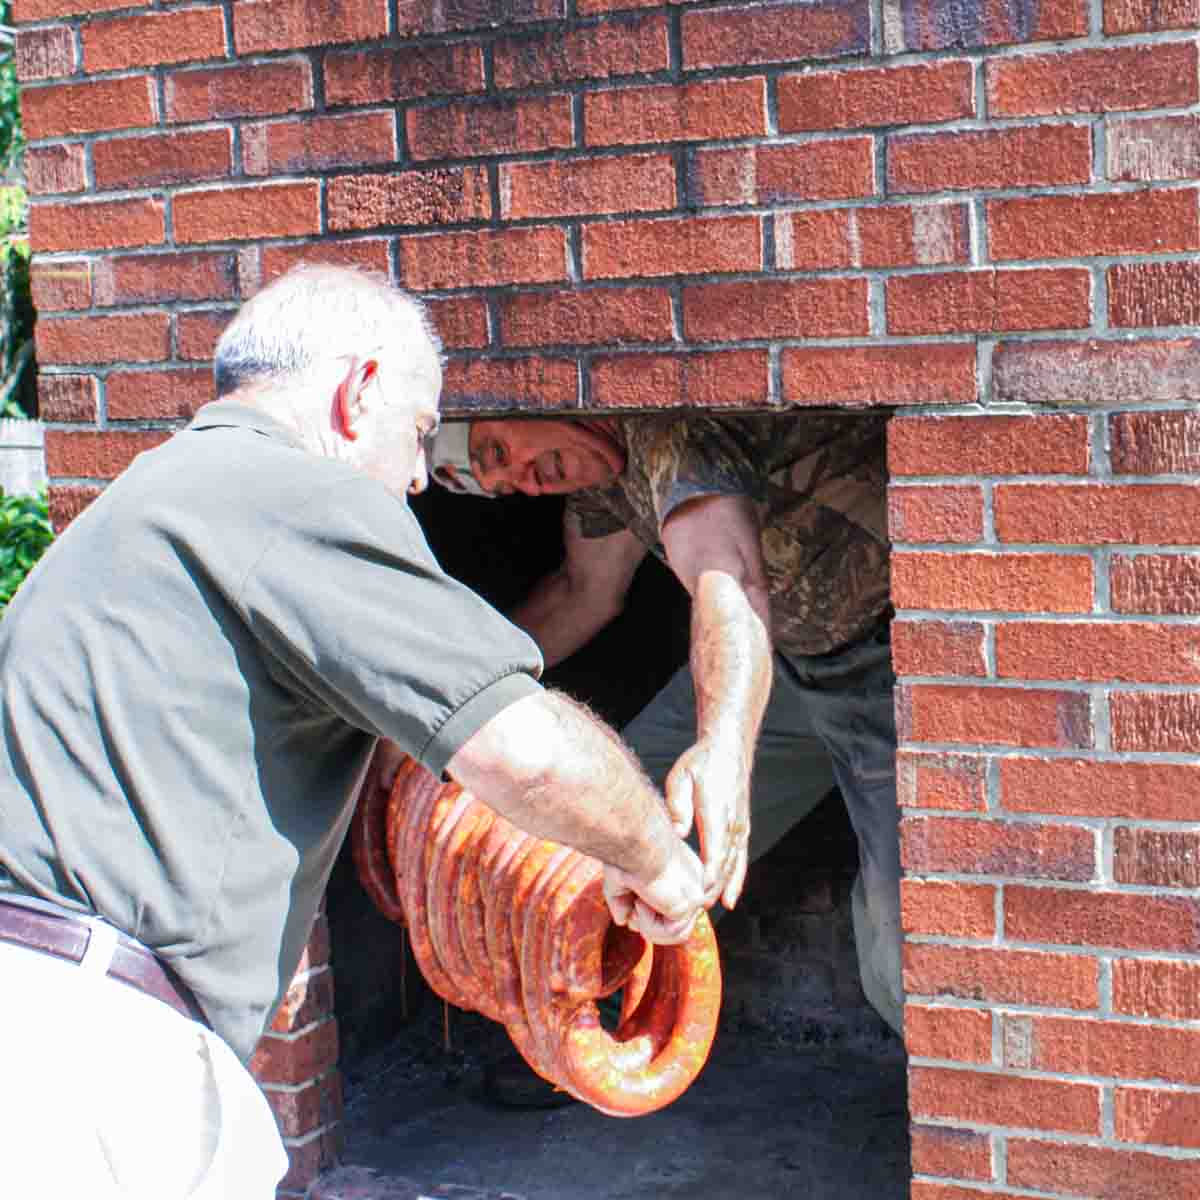 Two men putting Portuguese sausage into a brick fireplace.